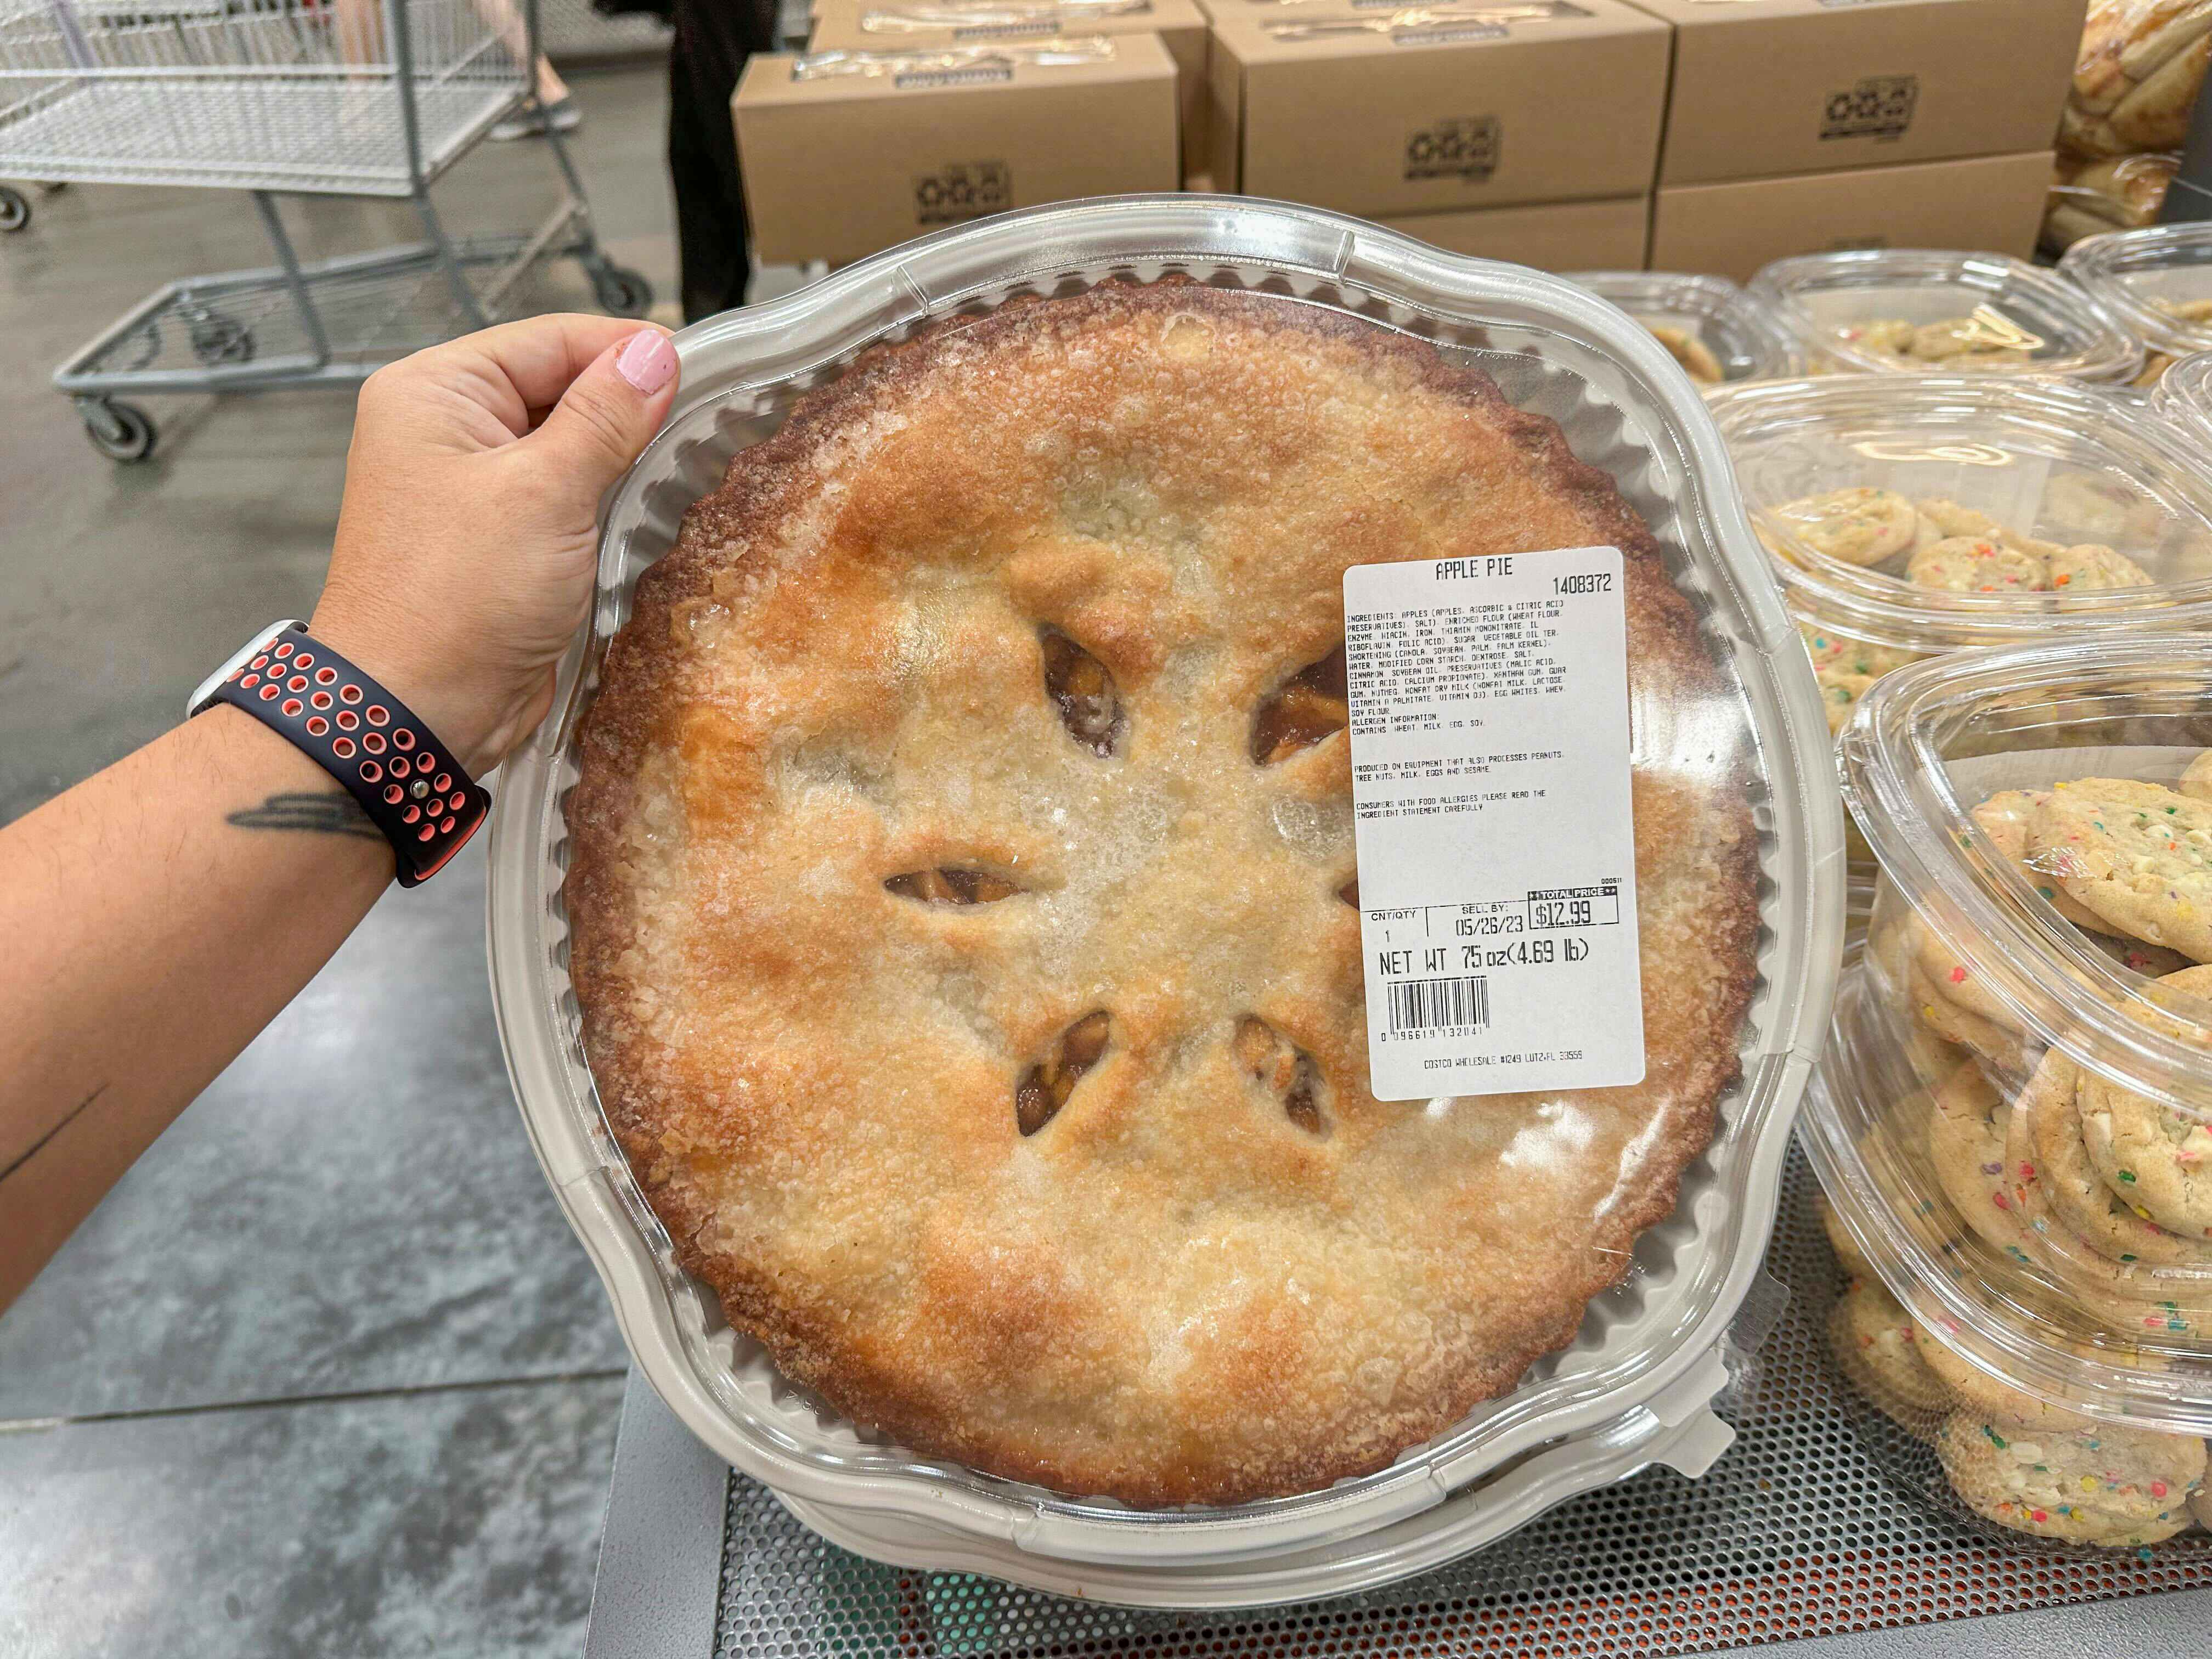 a person holding up an apple pie at costco